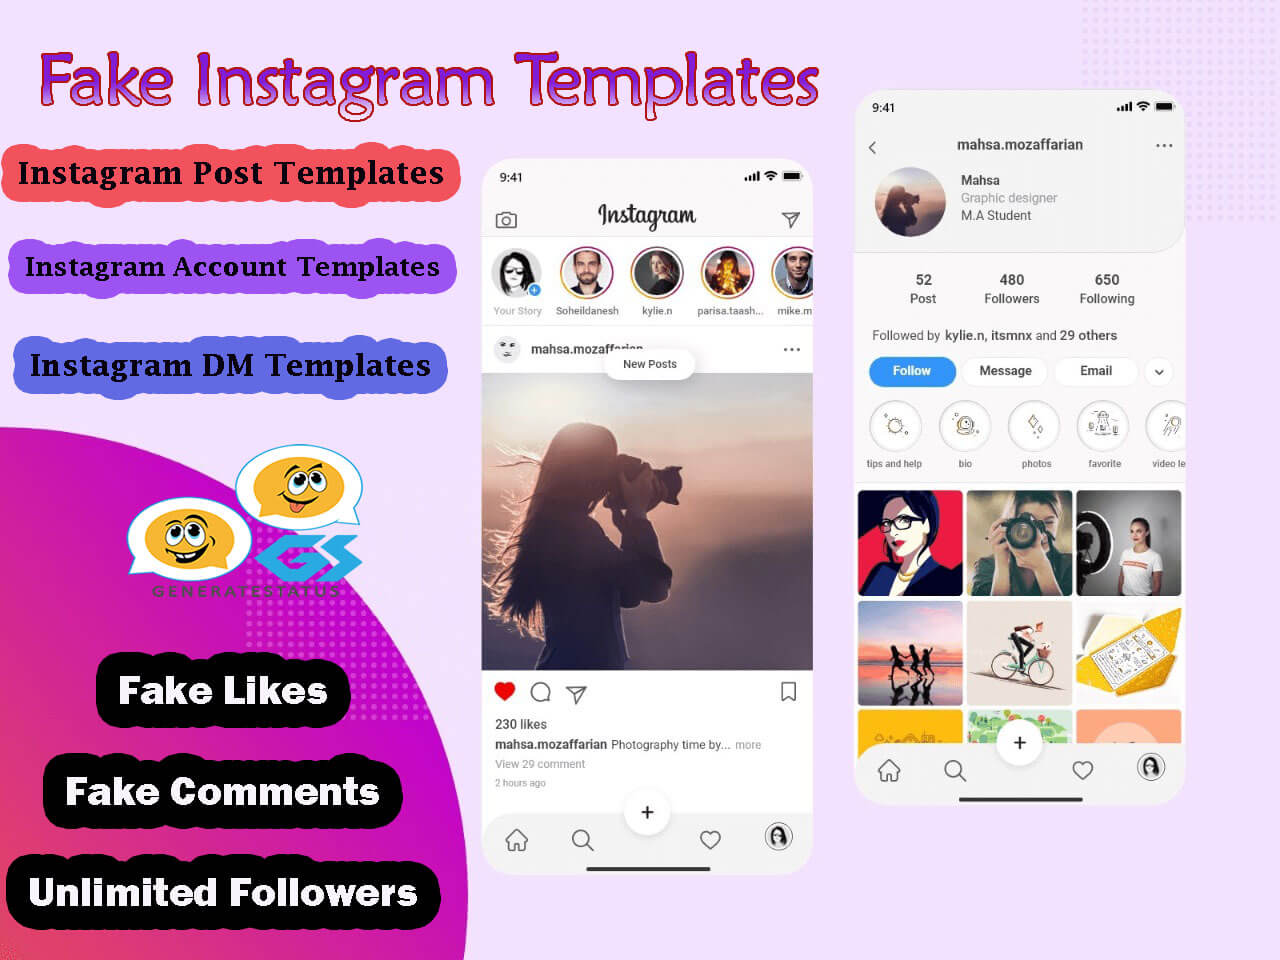 instagram-templates-fake-instagram-post-account-and-dm-templates